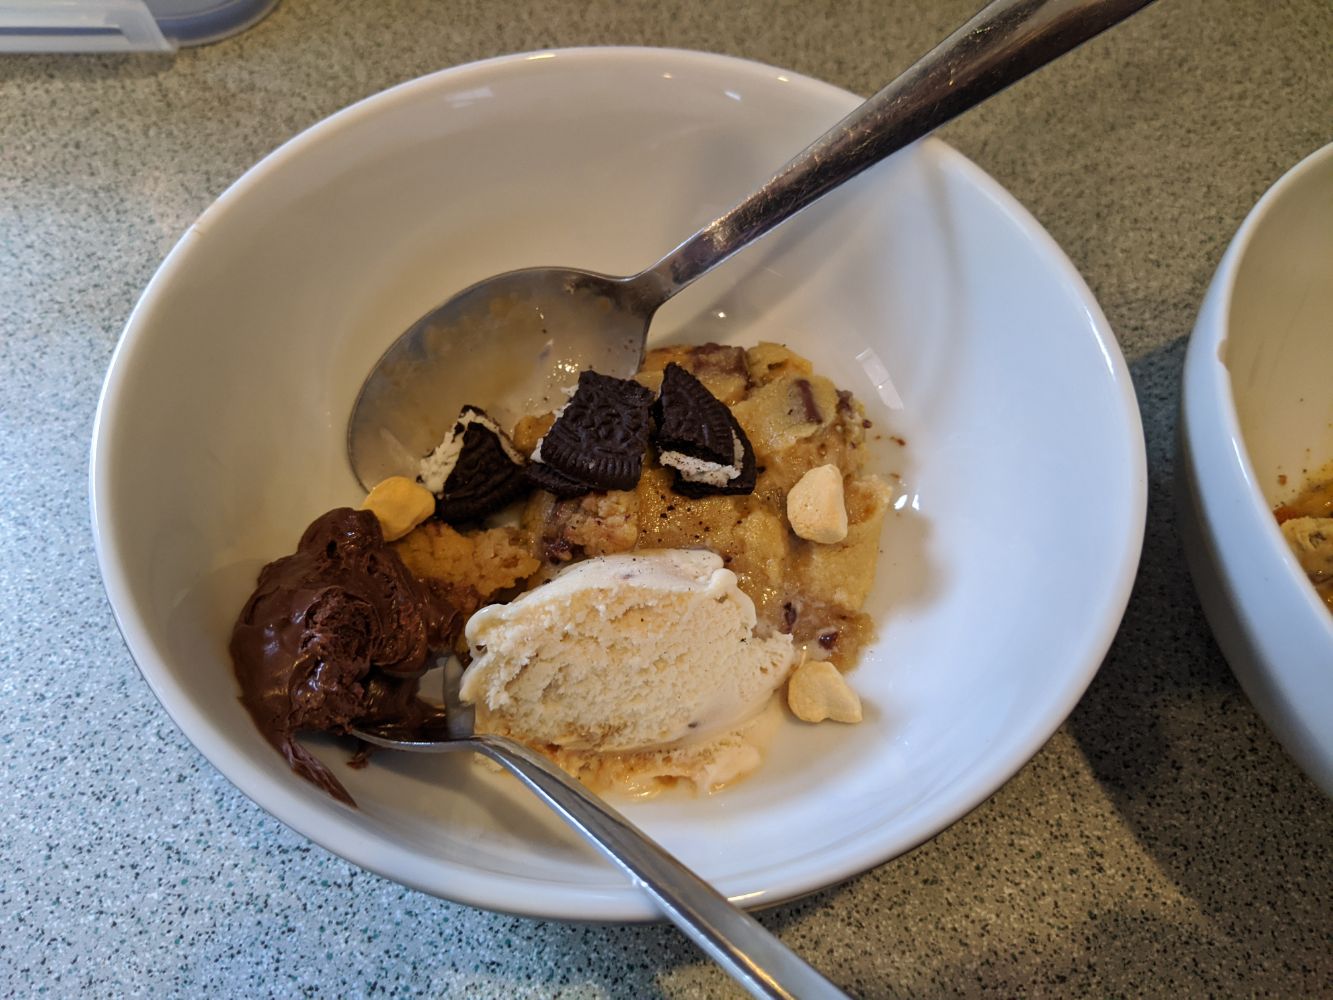 A bowl with half a cookie, a small scoop of ice cream, chunks of honeycomb and some broken up Oreo, and a spoon of Nutella